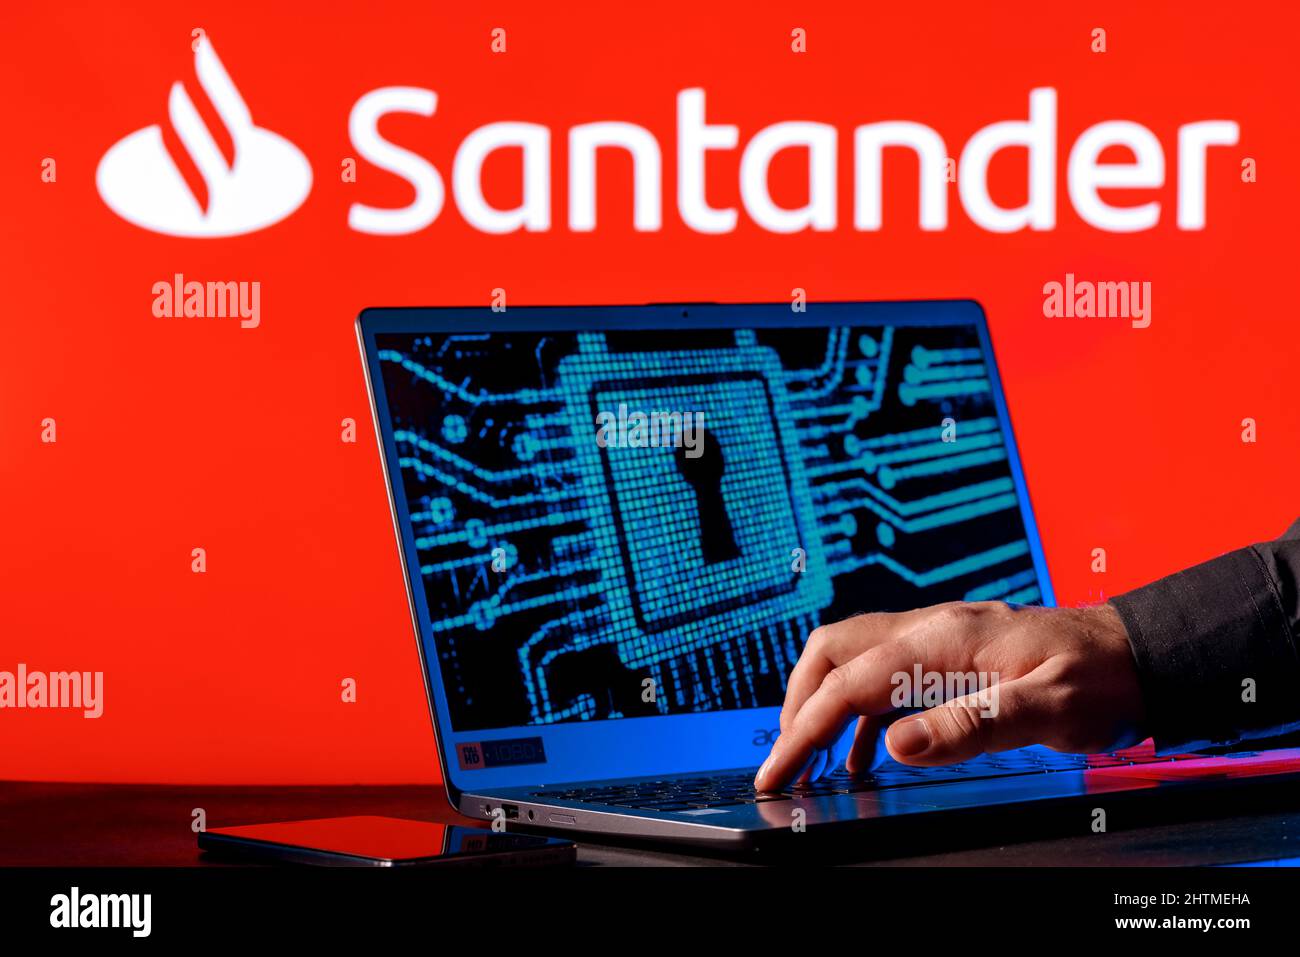 Laptop with lock symbol on screen on background of  Santander bank logo. Finger points to lock symbol. Concept of data hacking. Stock Photo